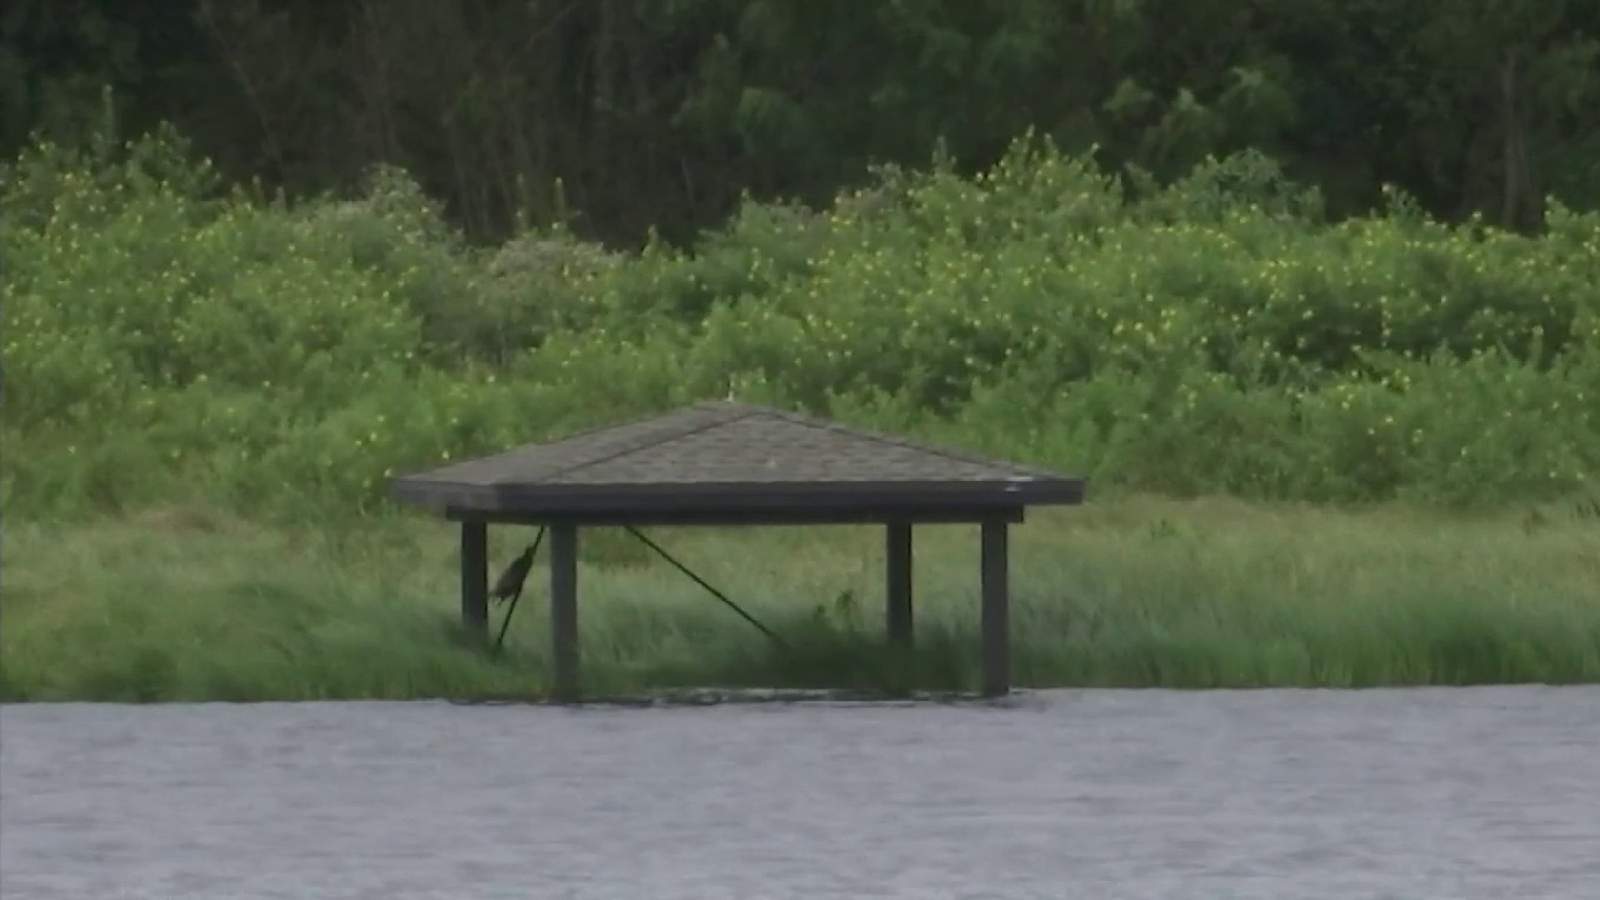 County leaders respond after above-average rainfall blamed for Gotha flooding problems